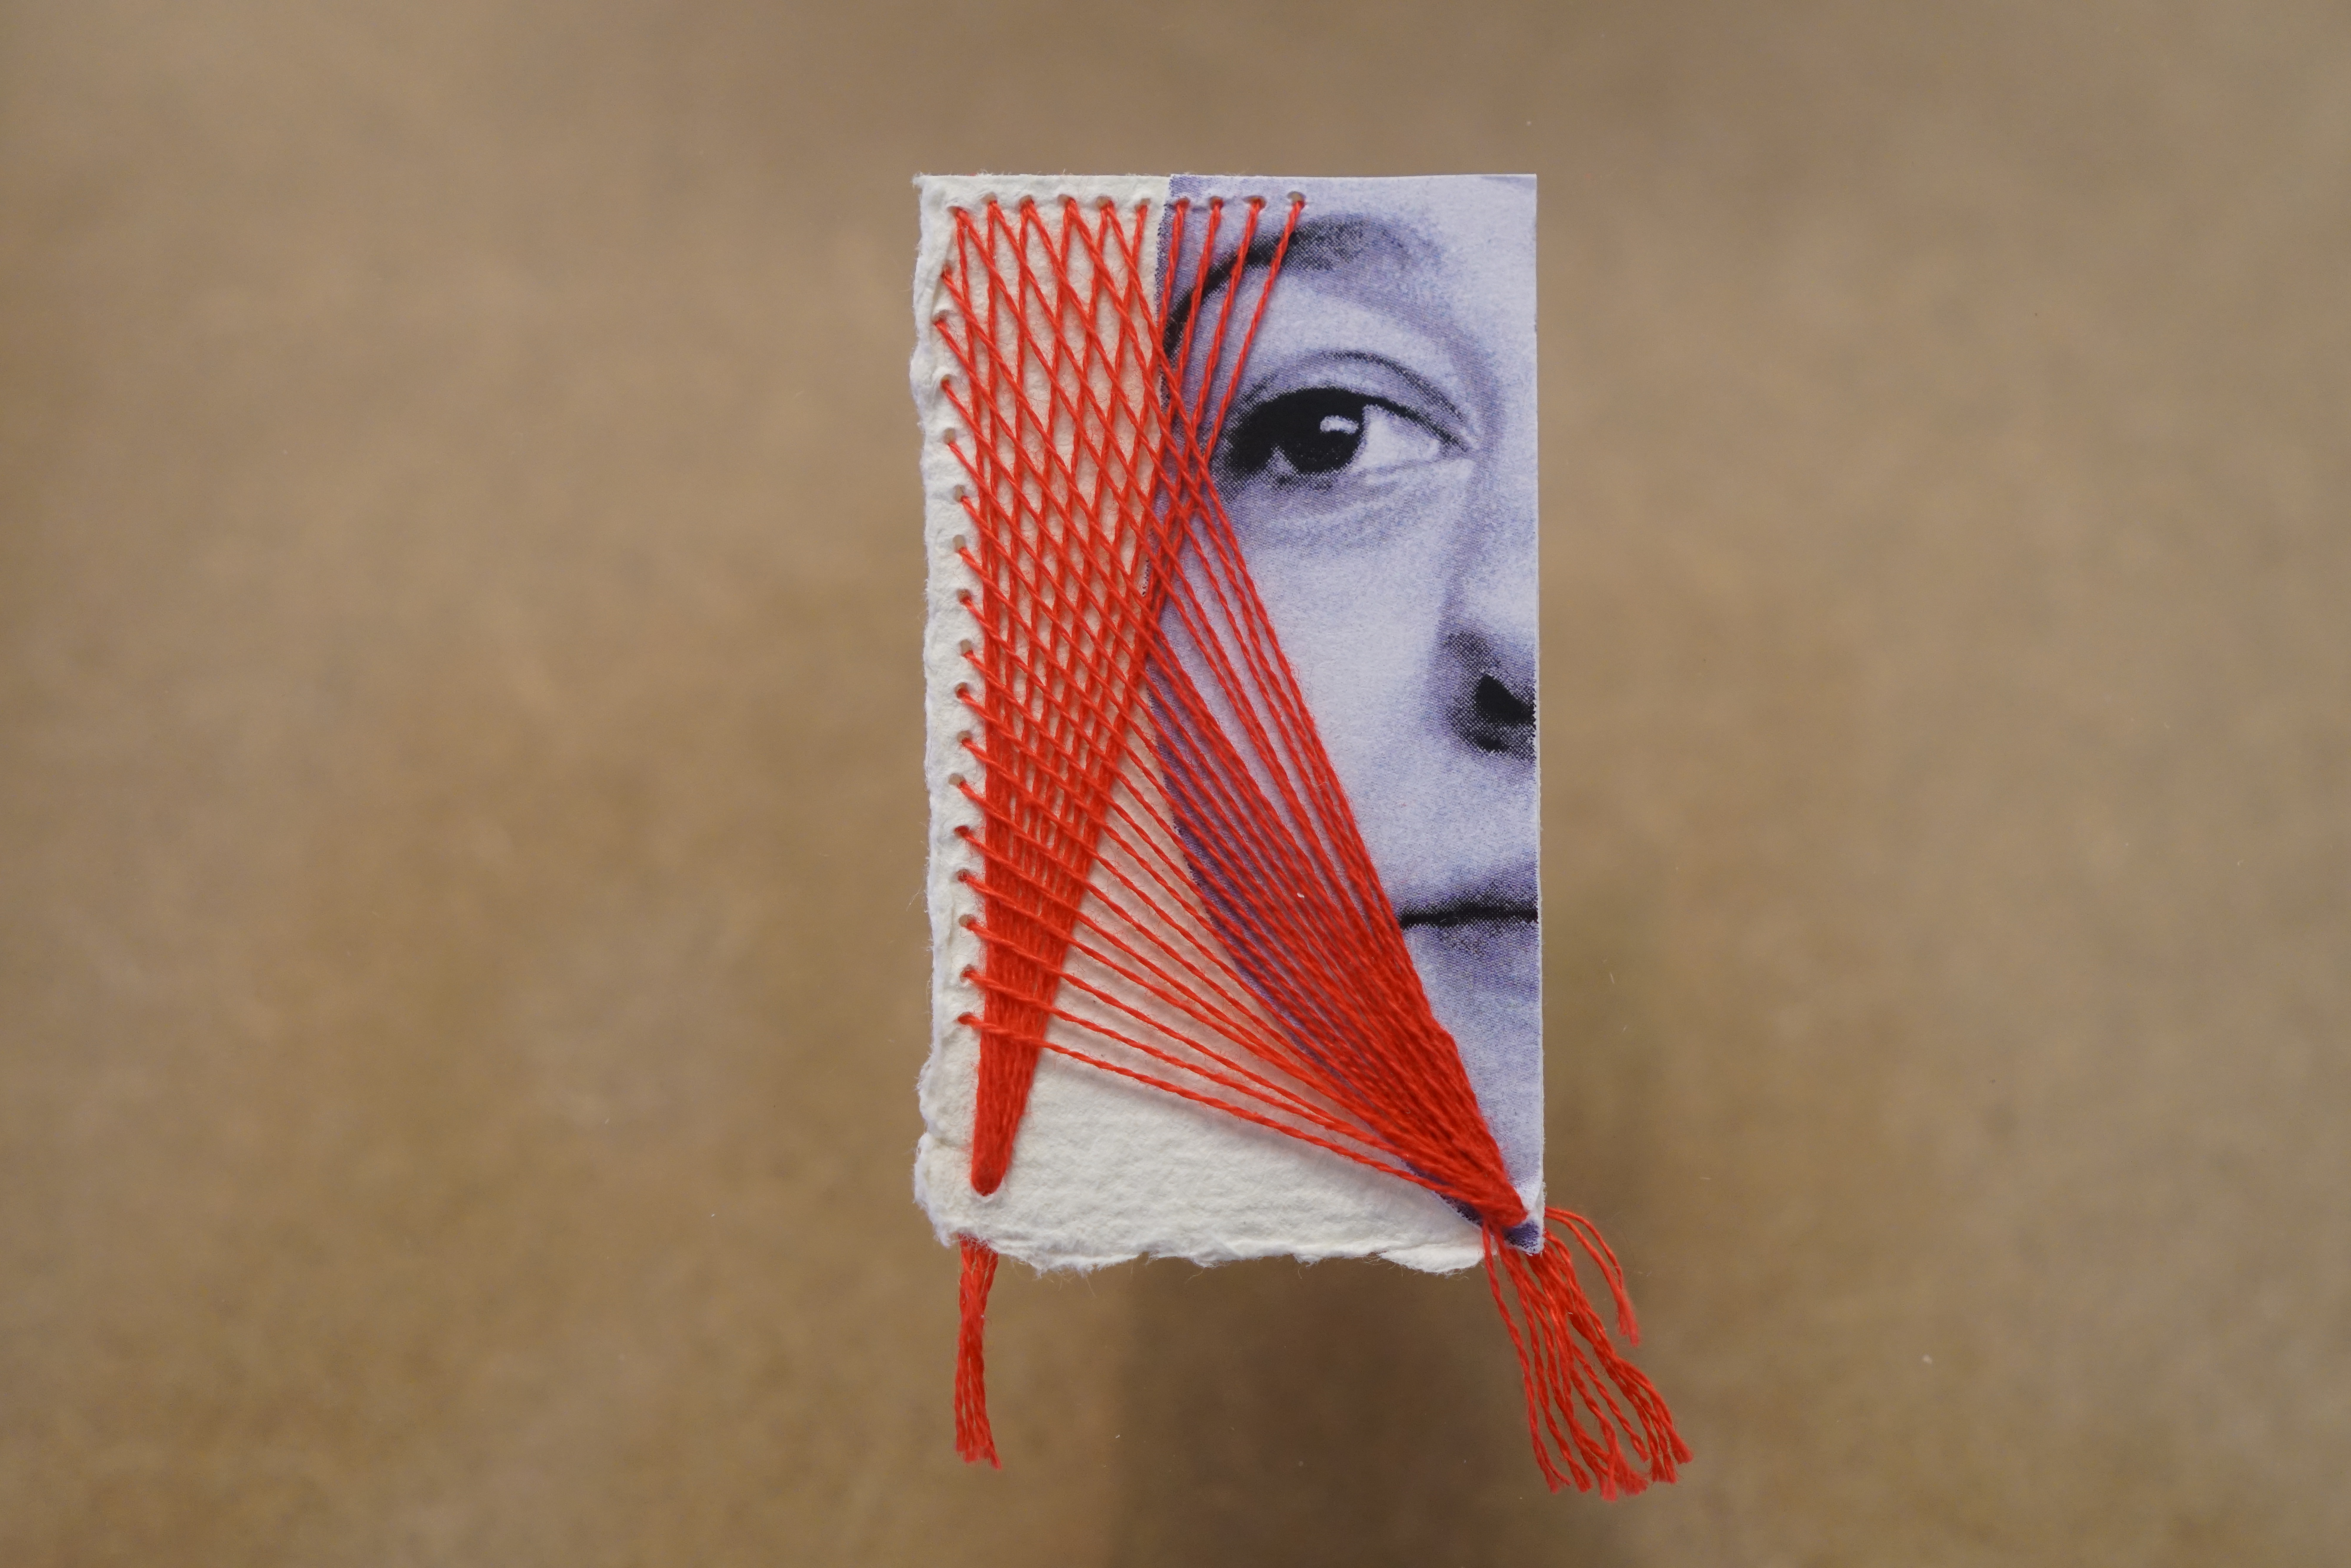 An intricate detail of a sketched face with red stitching set against a light wood background